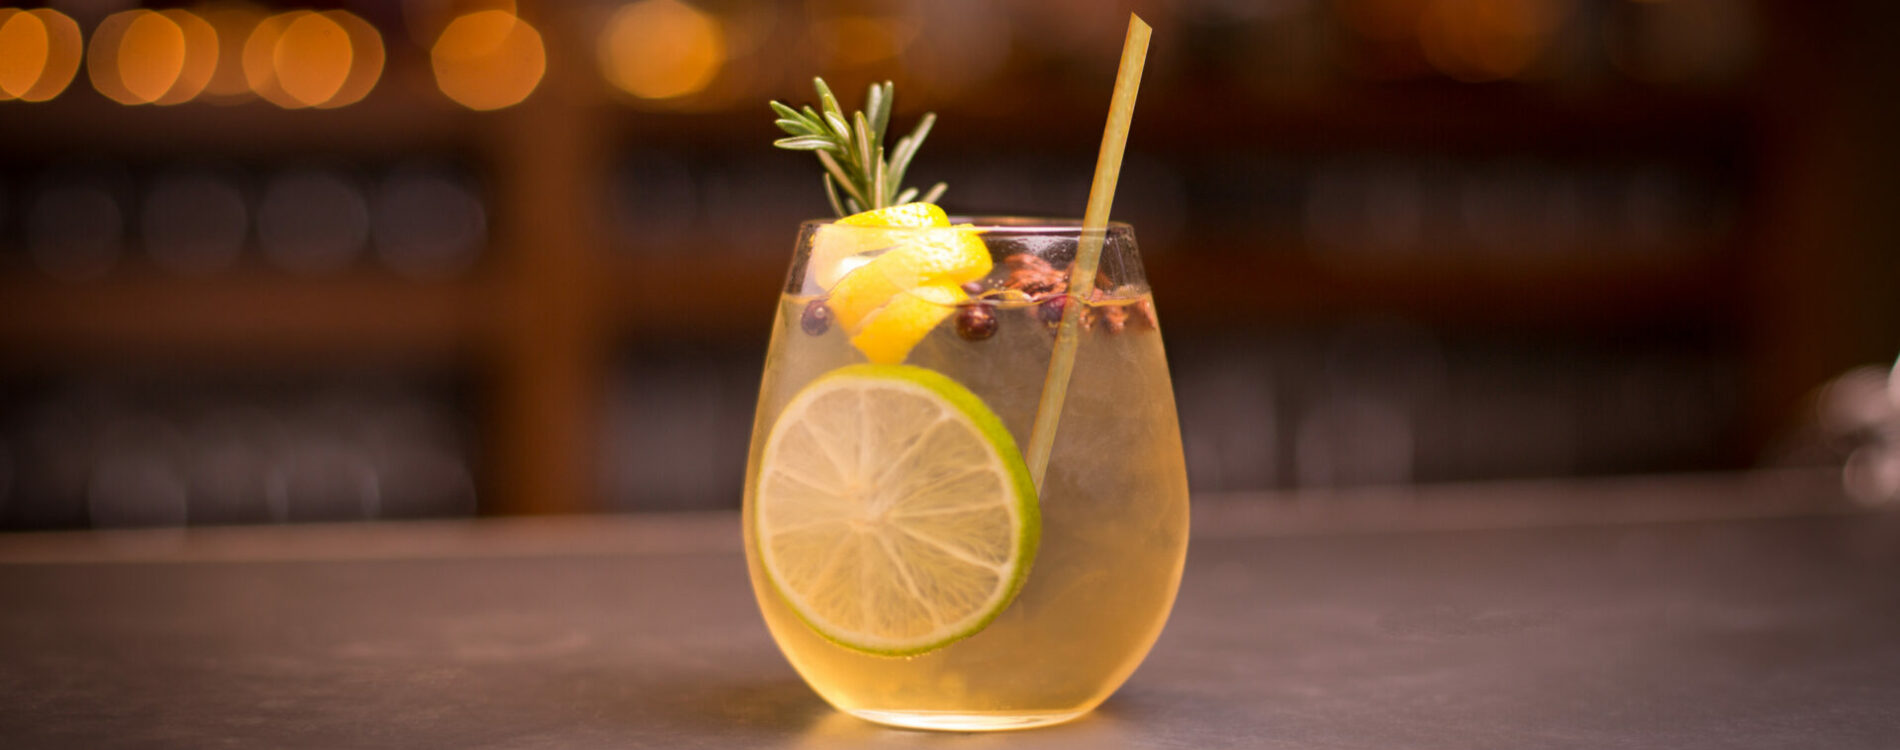 Gin and tonic cocktail with lemon and rosemary garnish